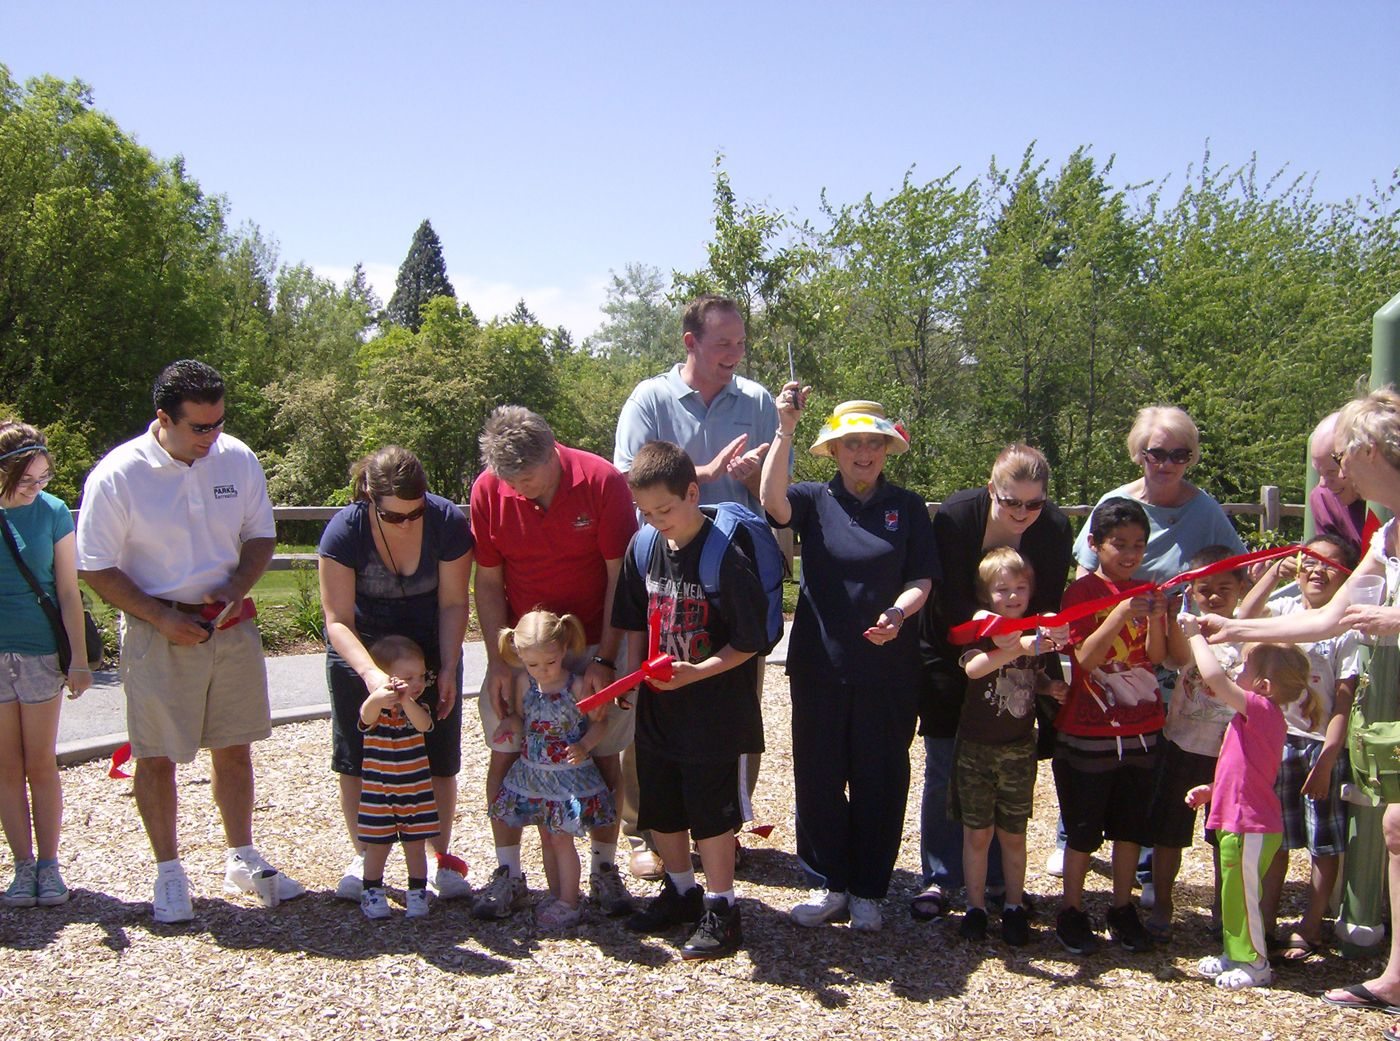 Kids of all ages enjoyed great weather at the opening of Bosco Farm Neighborhood Park on June 4.